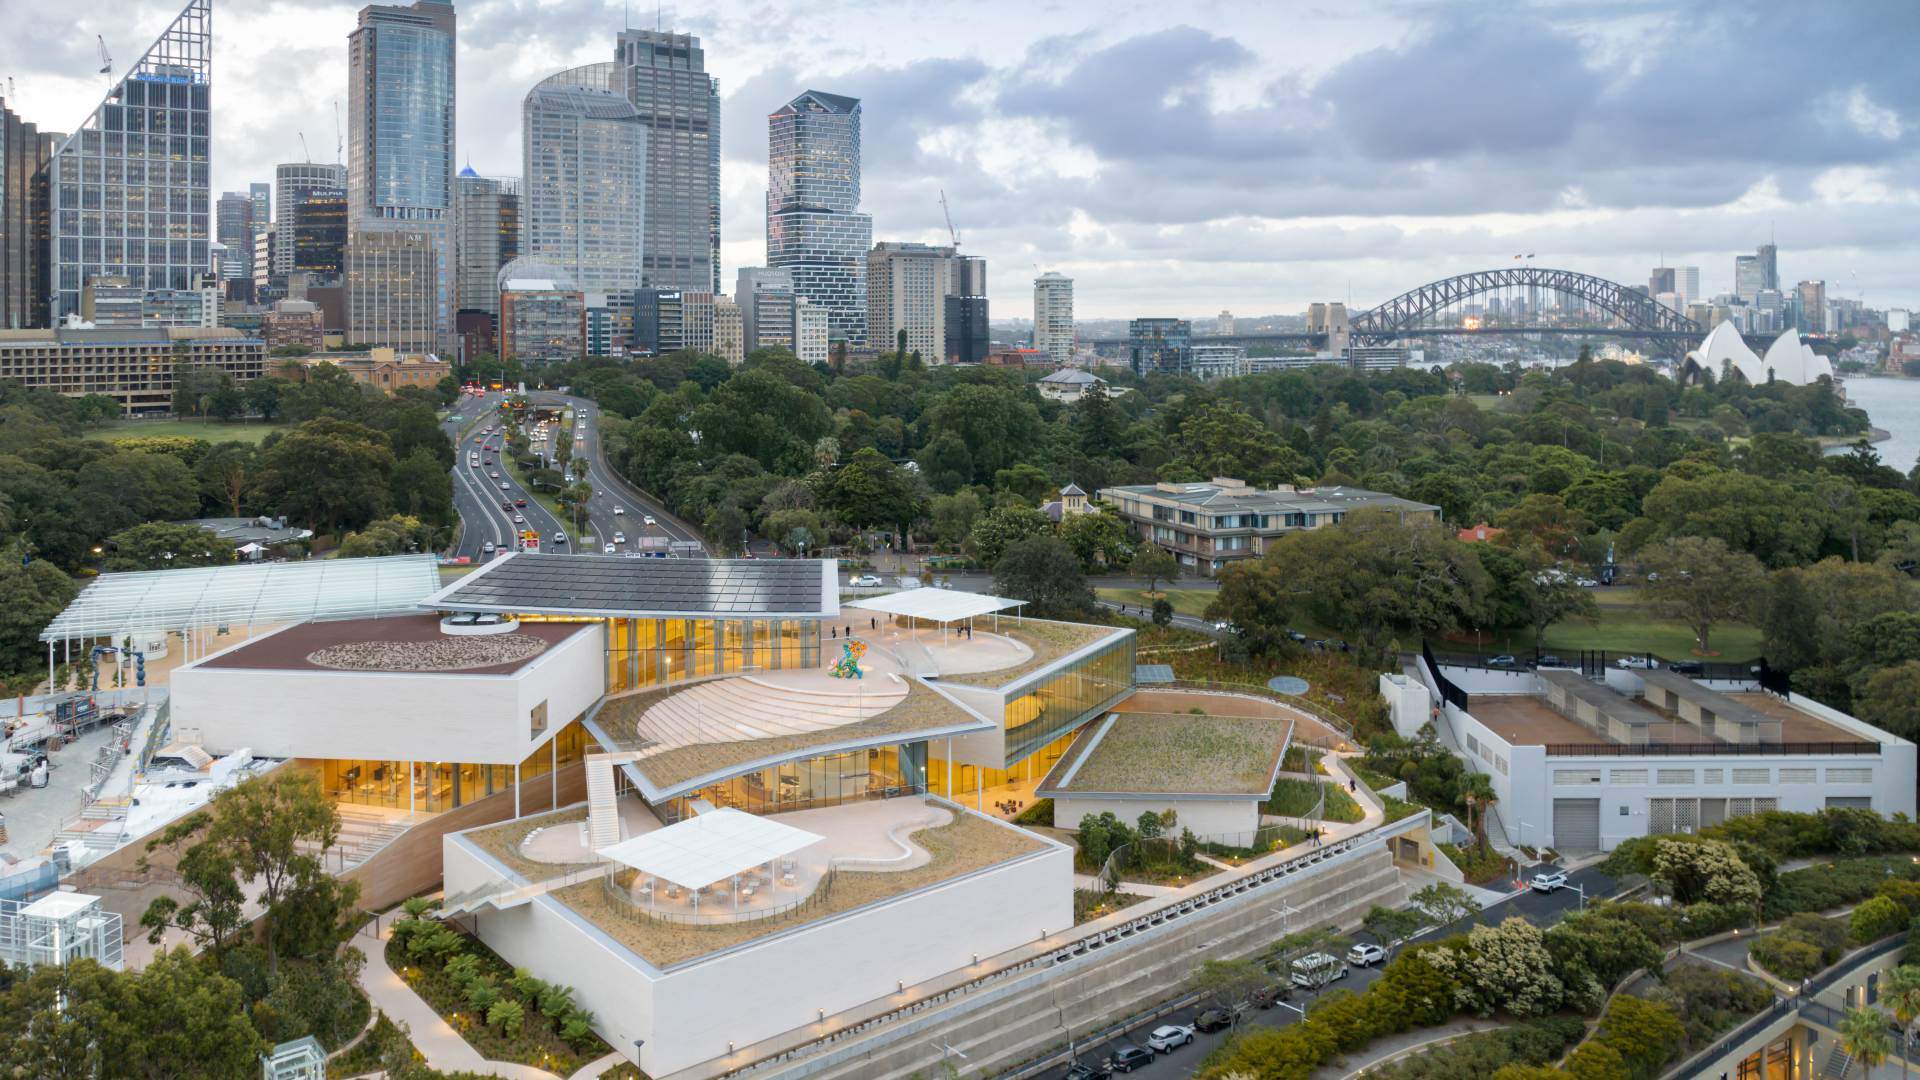 The Art Gallery of NSW's Sydney Modern Project Has Arrived with Immersive Installations and Water Views